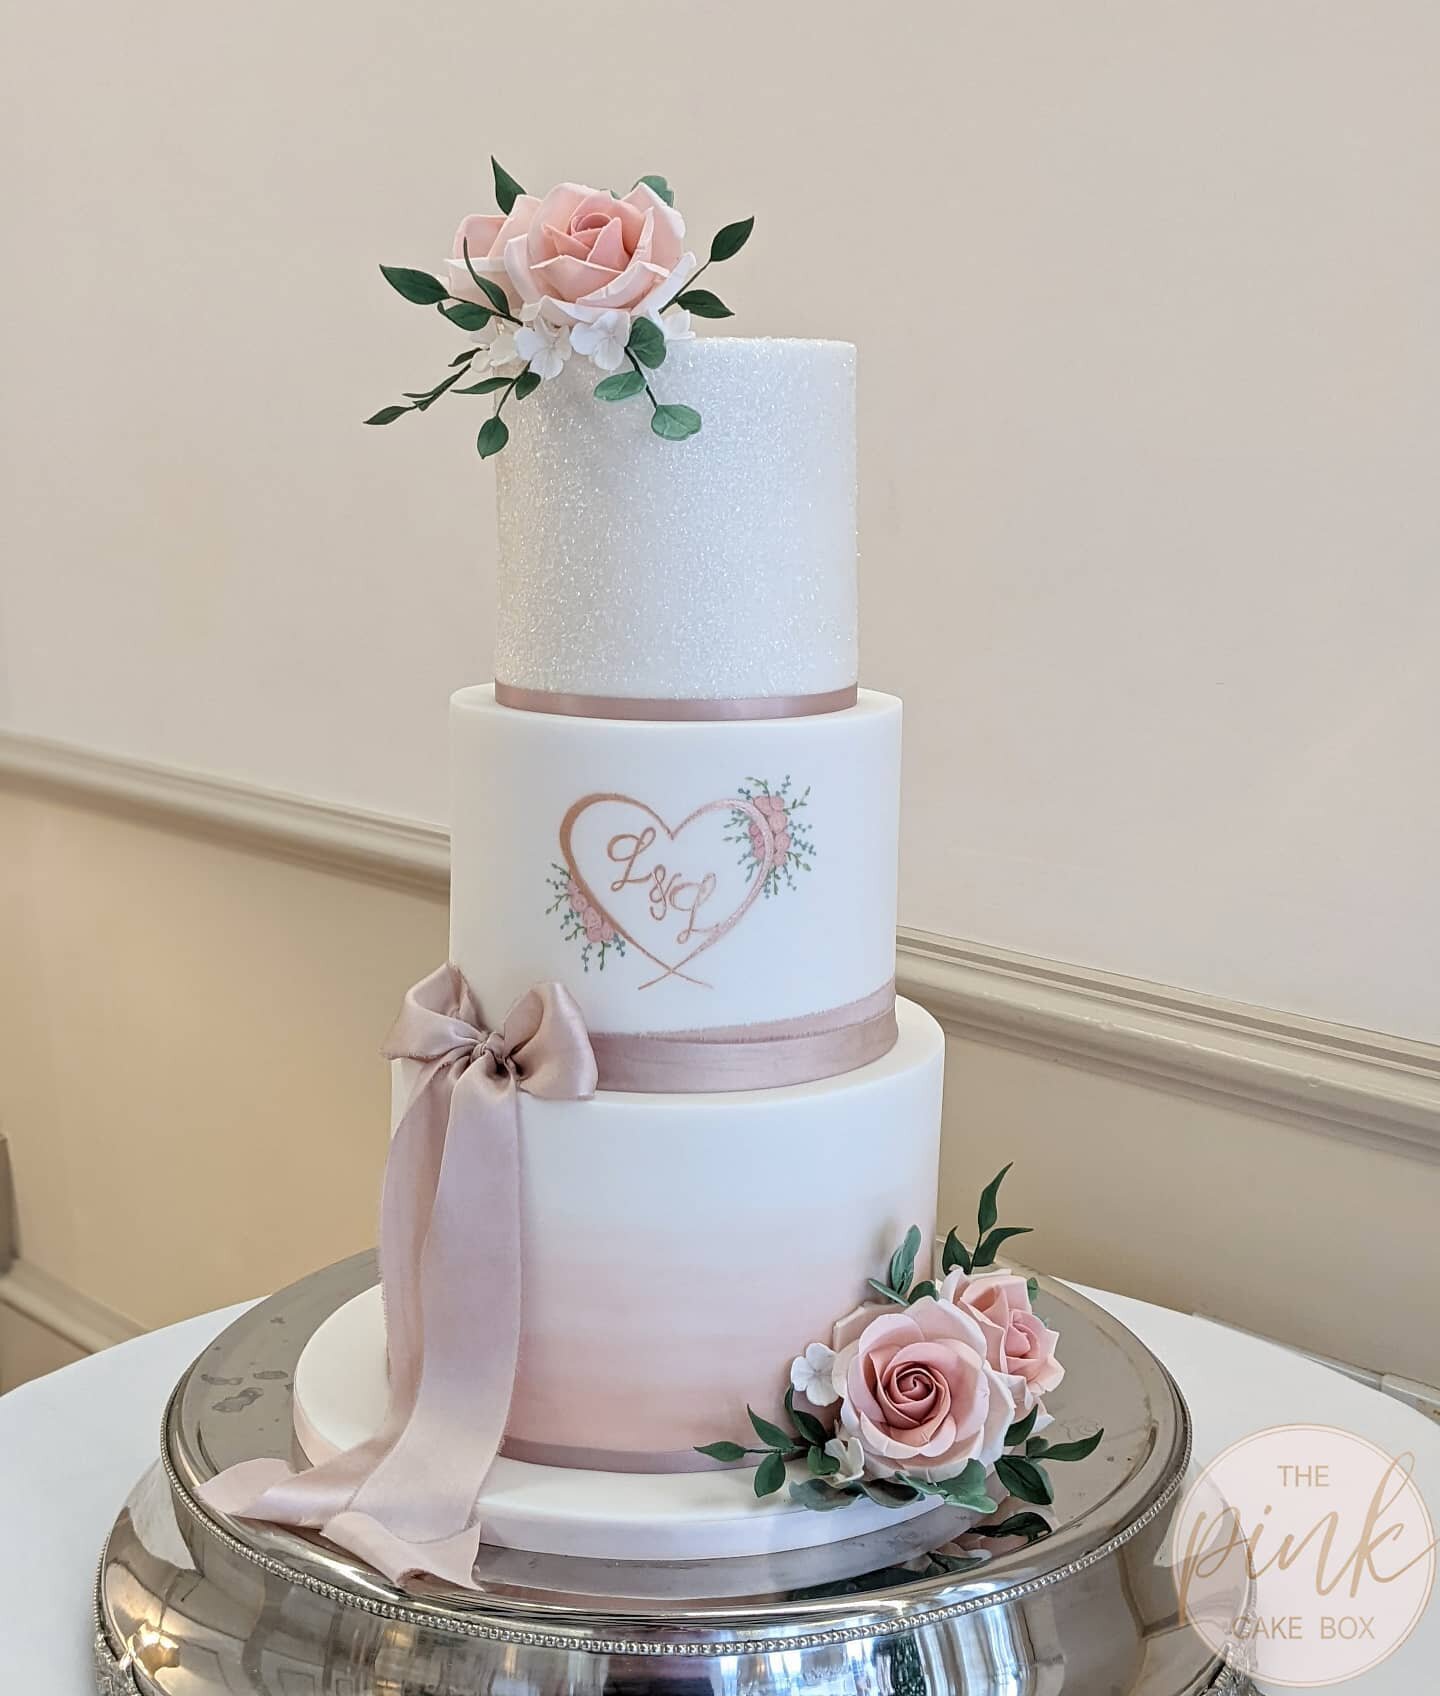 Laura and Lawrence's beautiful wedding cake at @hodsock.priory 😍
Lovely shades of blush and dusky pink, ombre watercolour, silk ribbon with a bow, sugar flowers, heart and initials to match invites &amp; wax seal, painted flowers and sparkles ❤️ rea